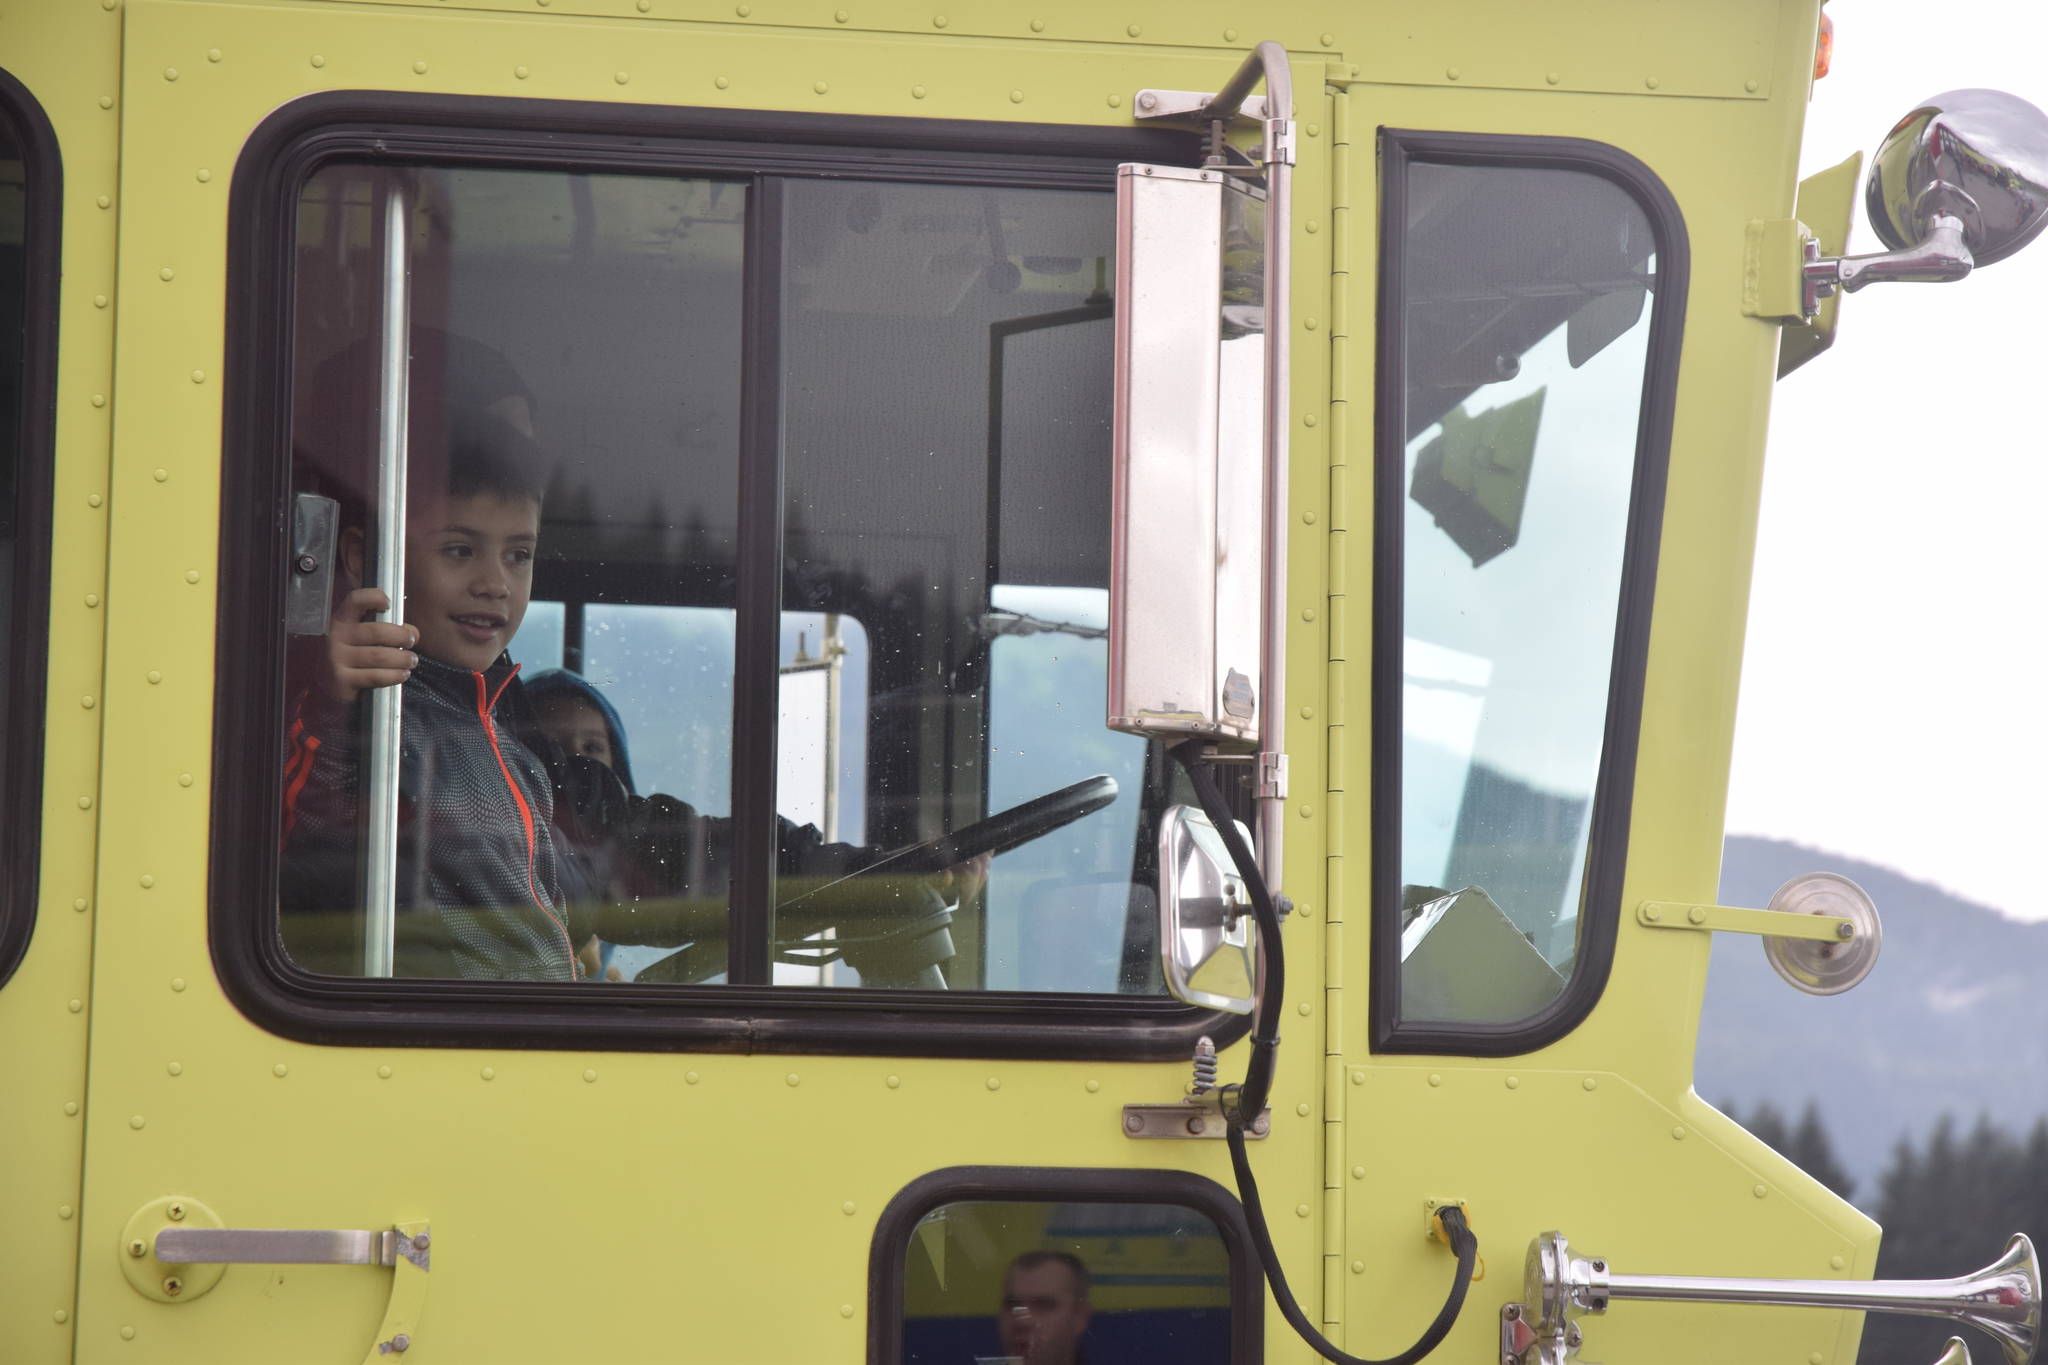 A youngster takes a ride in Capital City Fire/Rescue’s Aircraft Response Firefighting vehicle on Saturday. (Kevin Gullufsen | Juneau Empire)